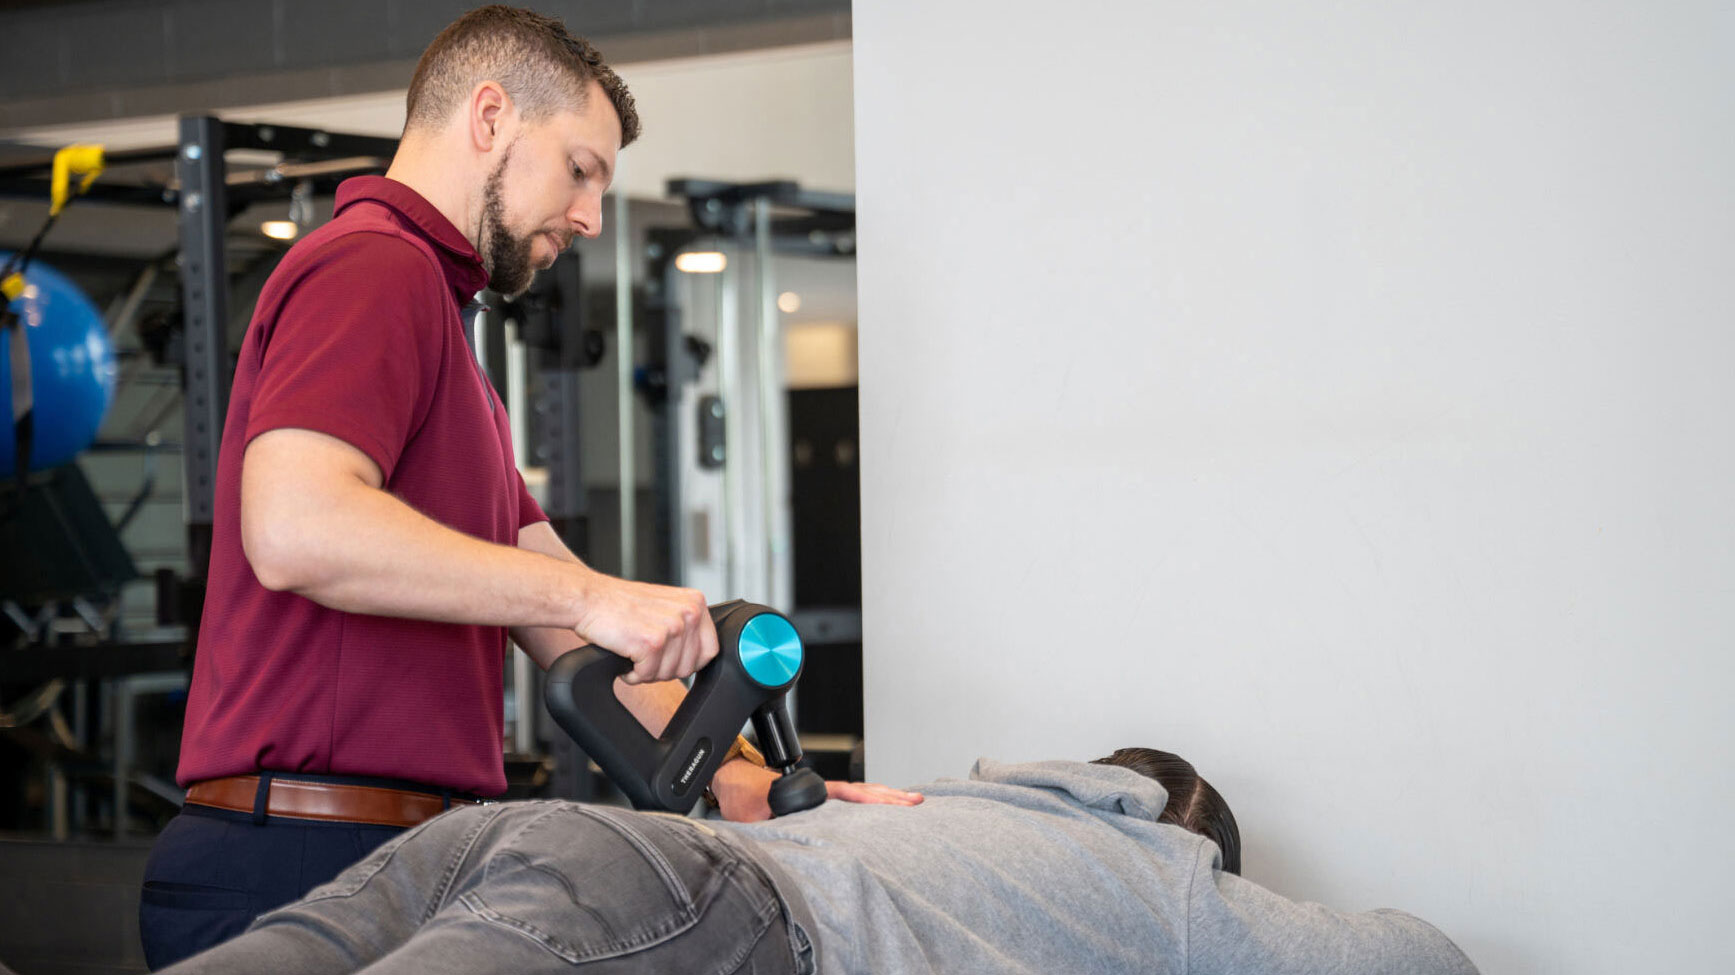 A Physical Therapist uses a massage gun to treat his patient who lies on a table